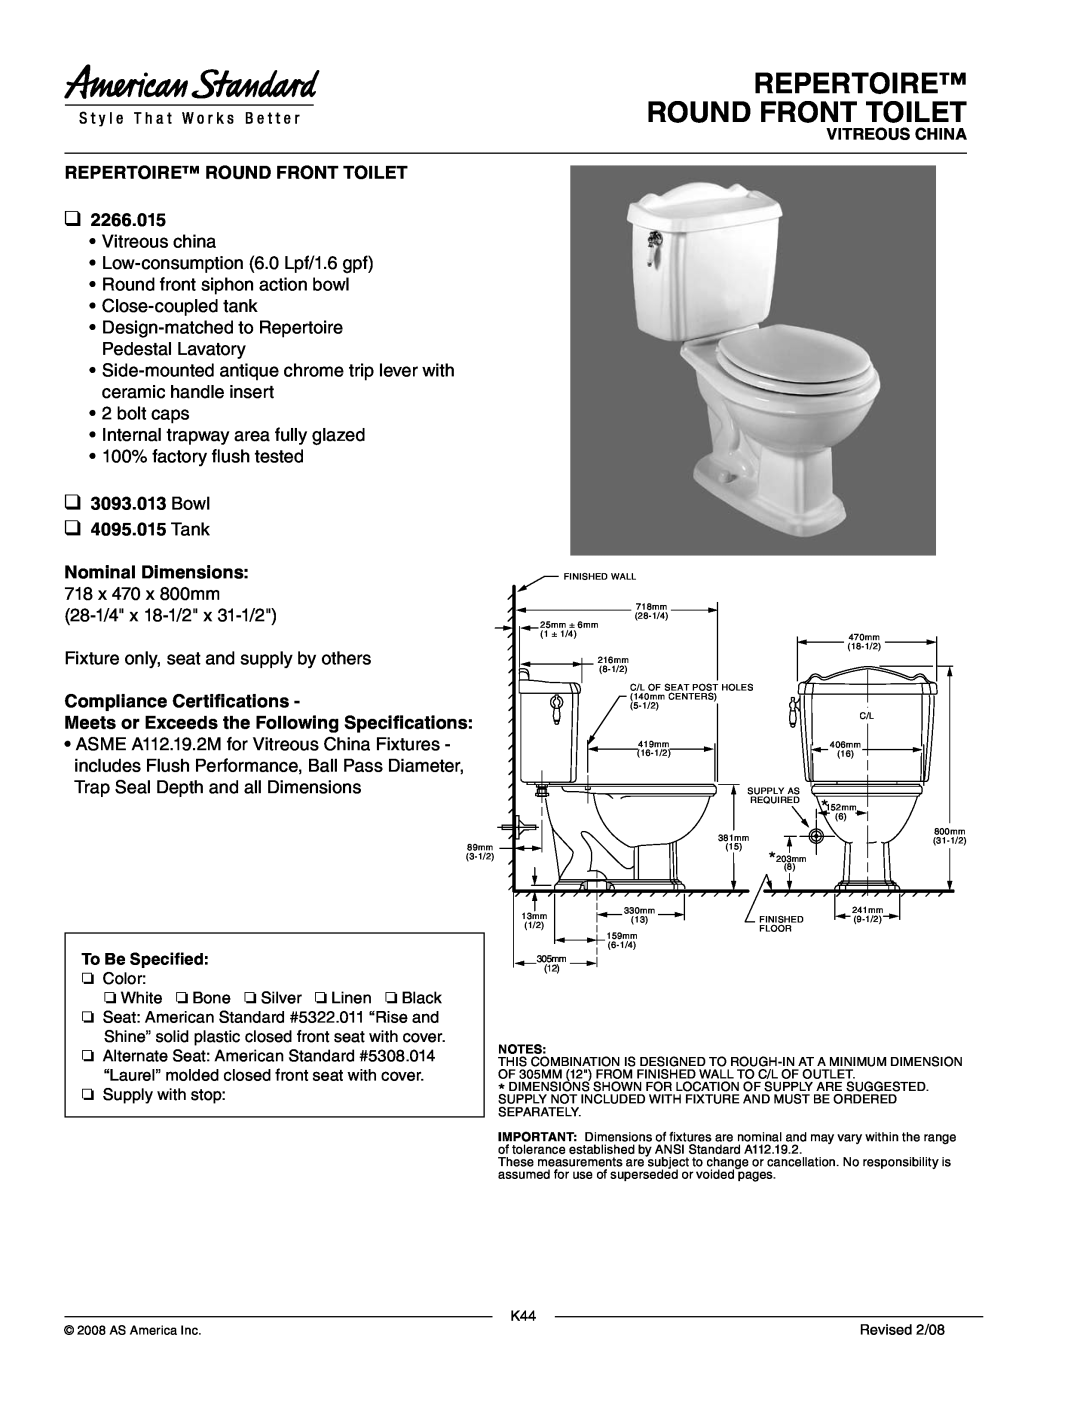 American Standard 2266.015 dimensions Repertoire Round Front Toilet, Bowl 4095.015 Tank, Nominal Dimensions 